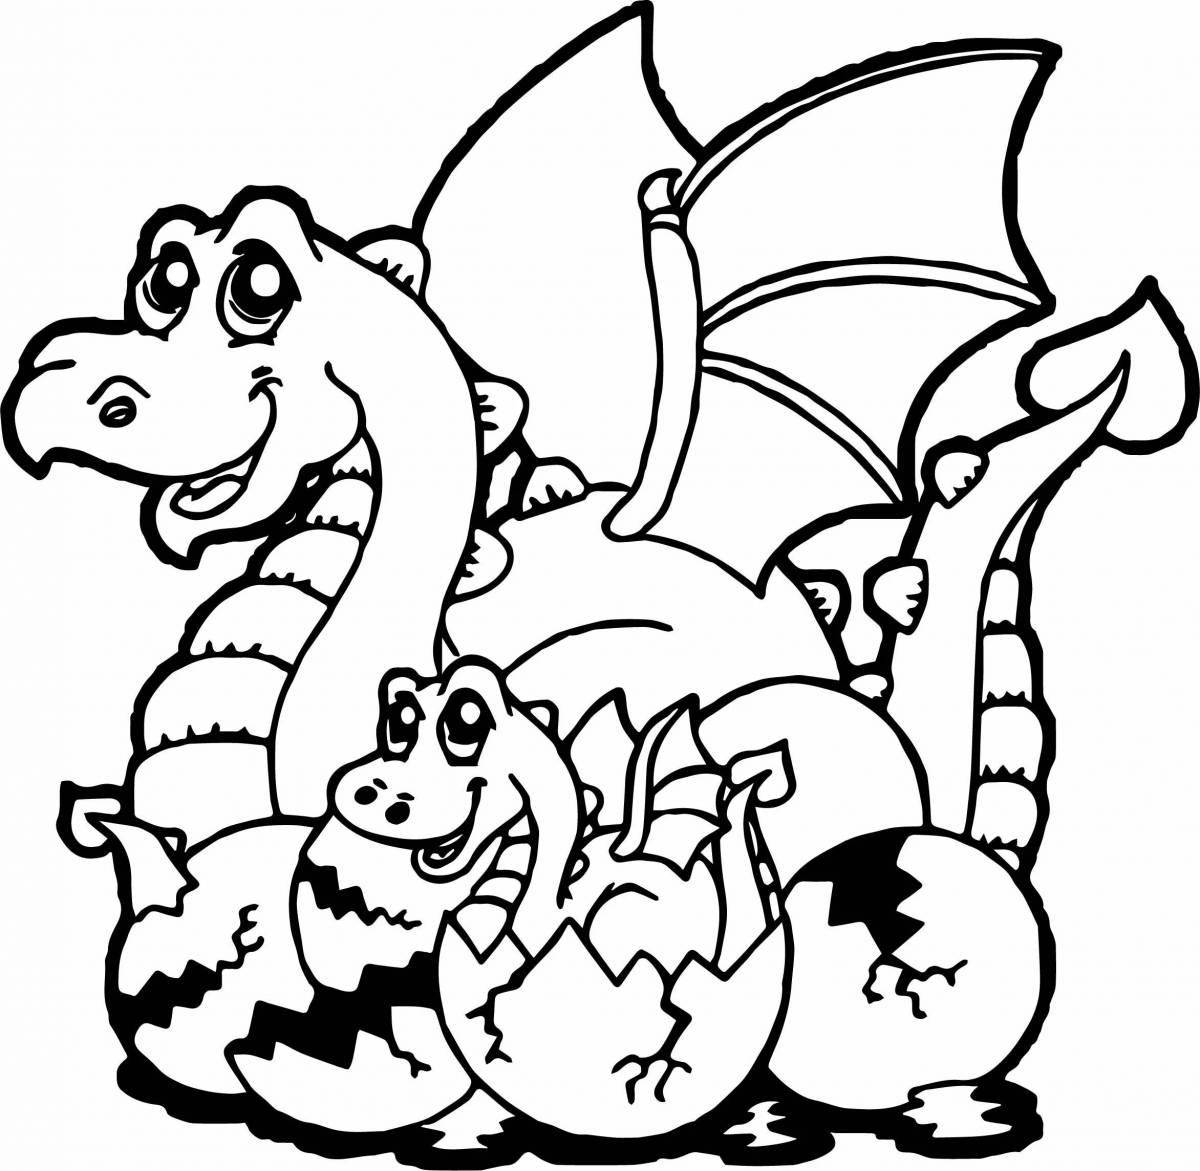 Glorious dragon coloring pages for kids 4-5 years old